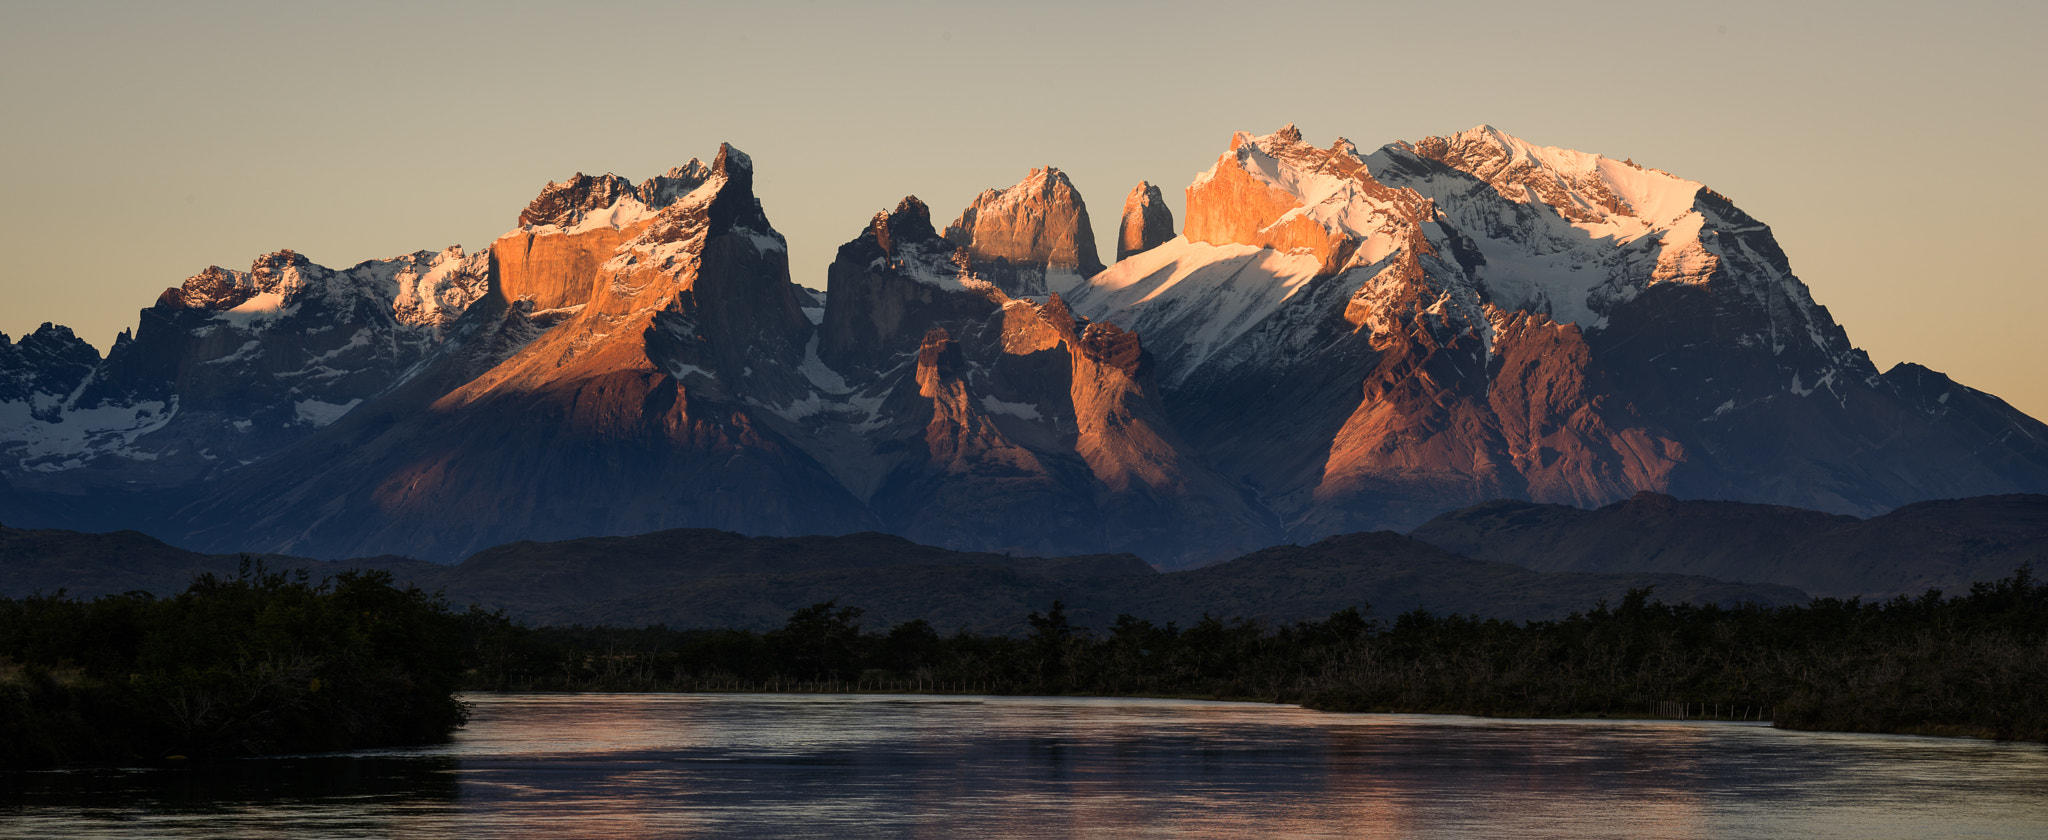 Sony a99 II sample photo. Torres del paine at sunset 2 photography